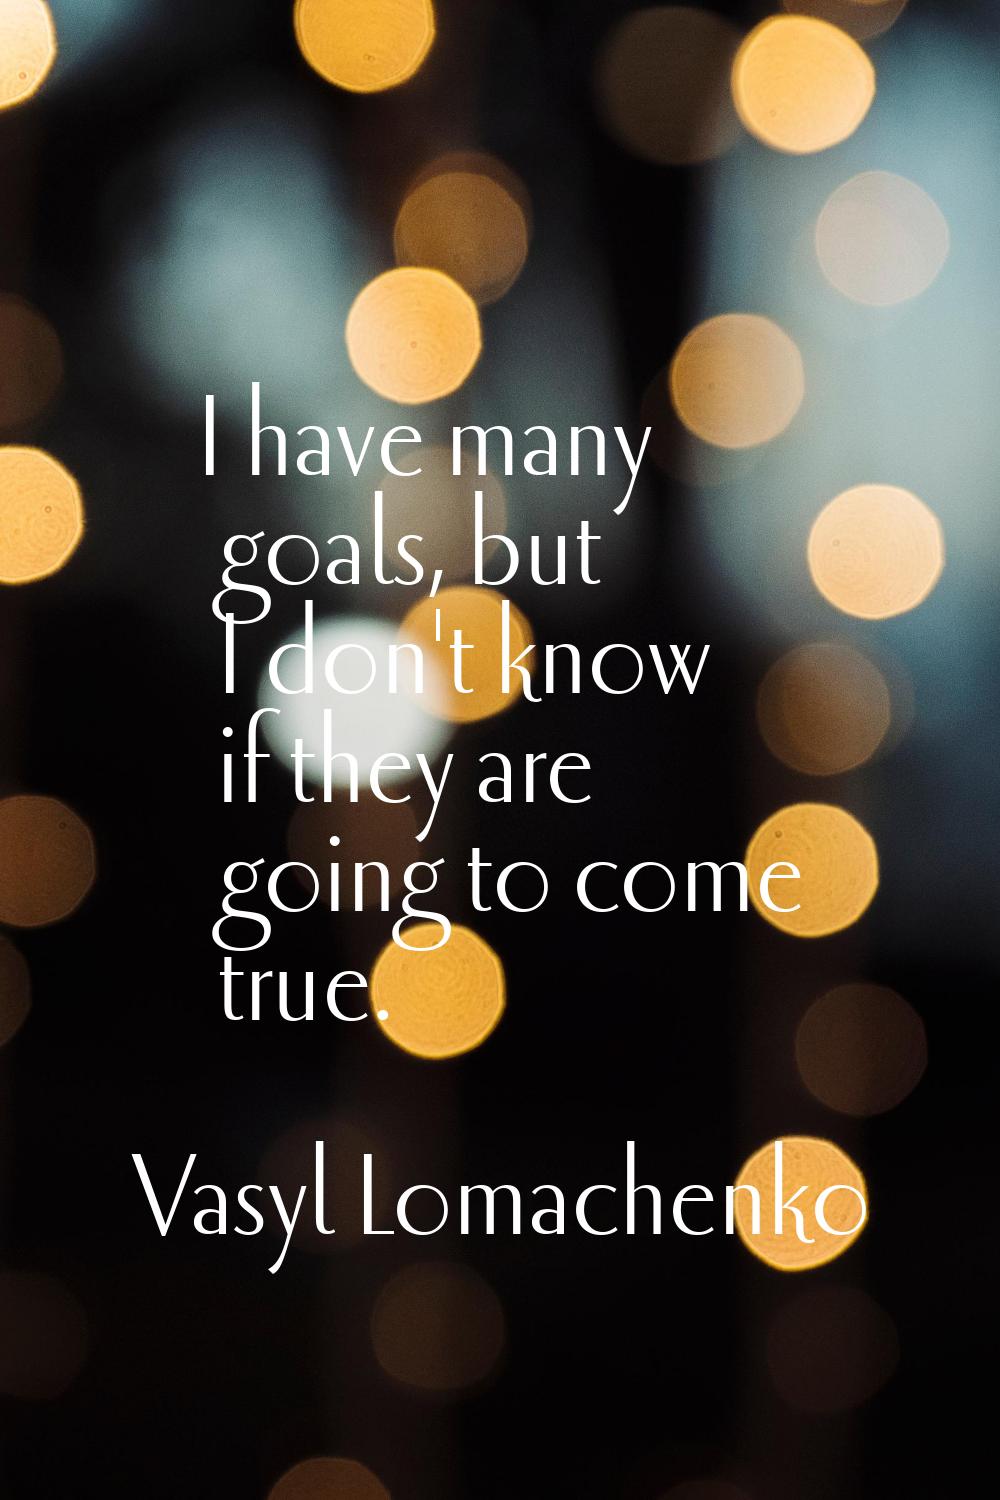 I have many goals, but I don't know if they are going to come true.